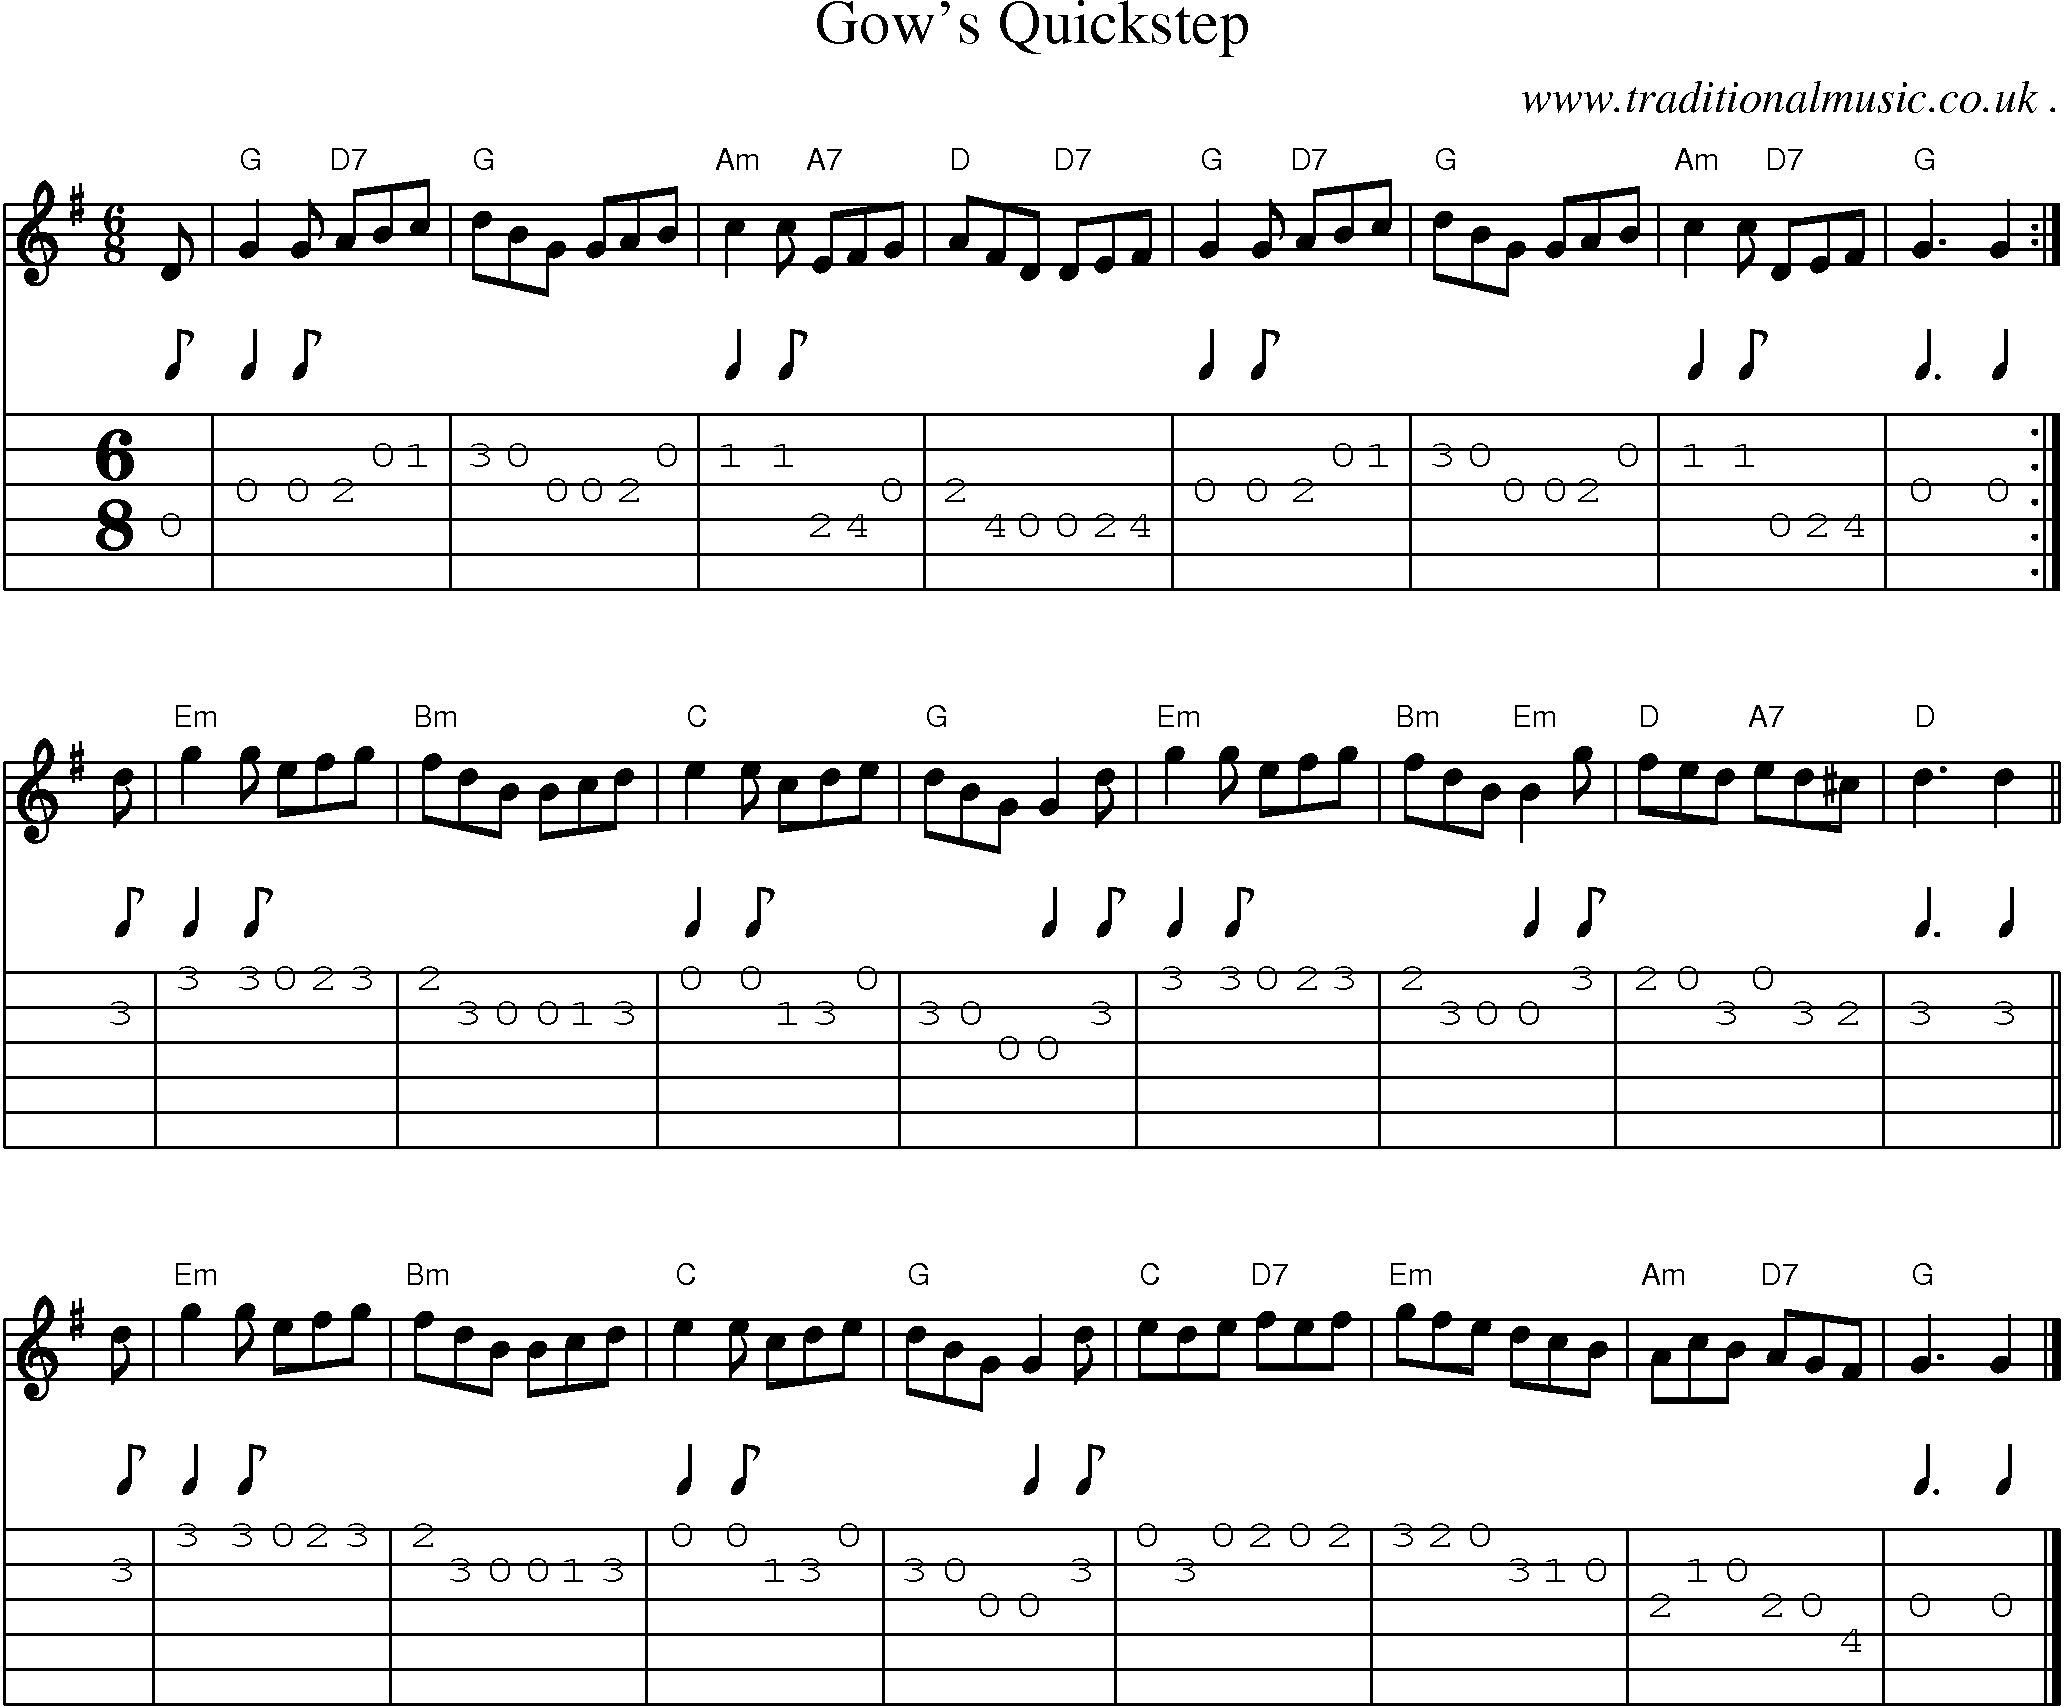 Sheet-music  score, Chords and Guitar Tabs for Gows Quickstep